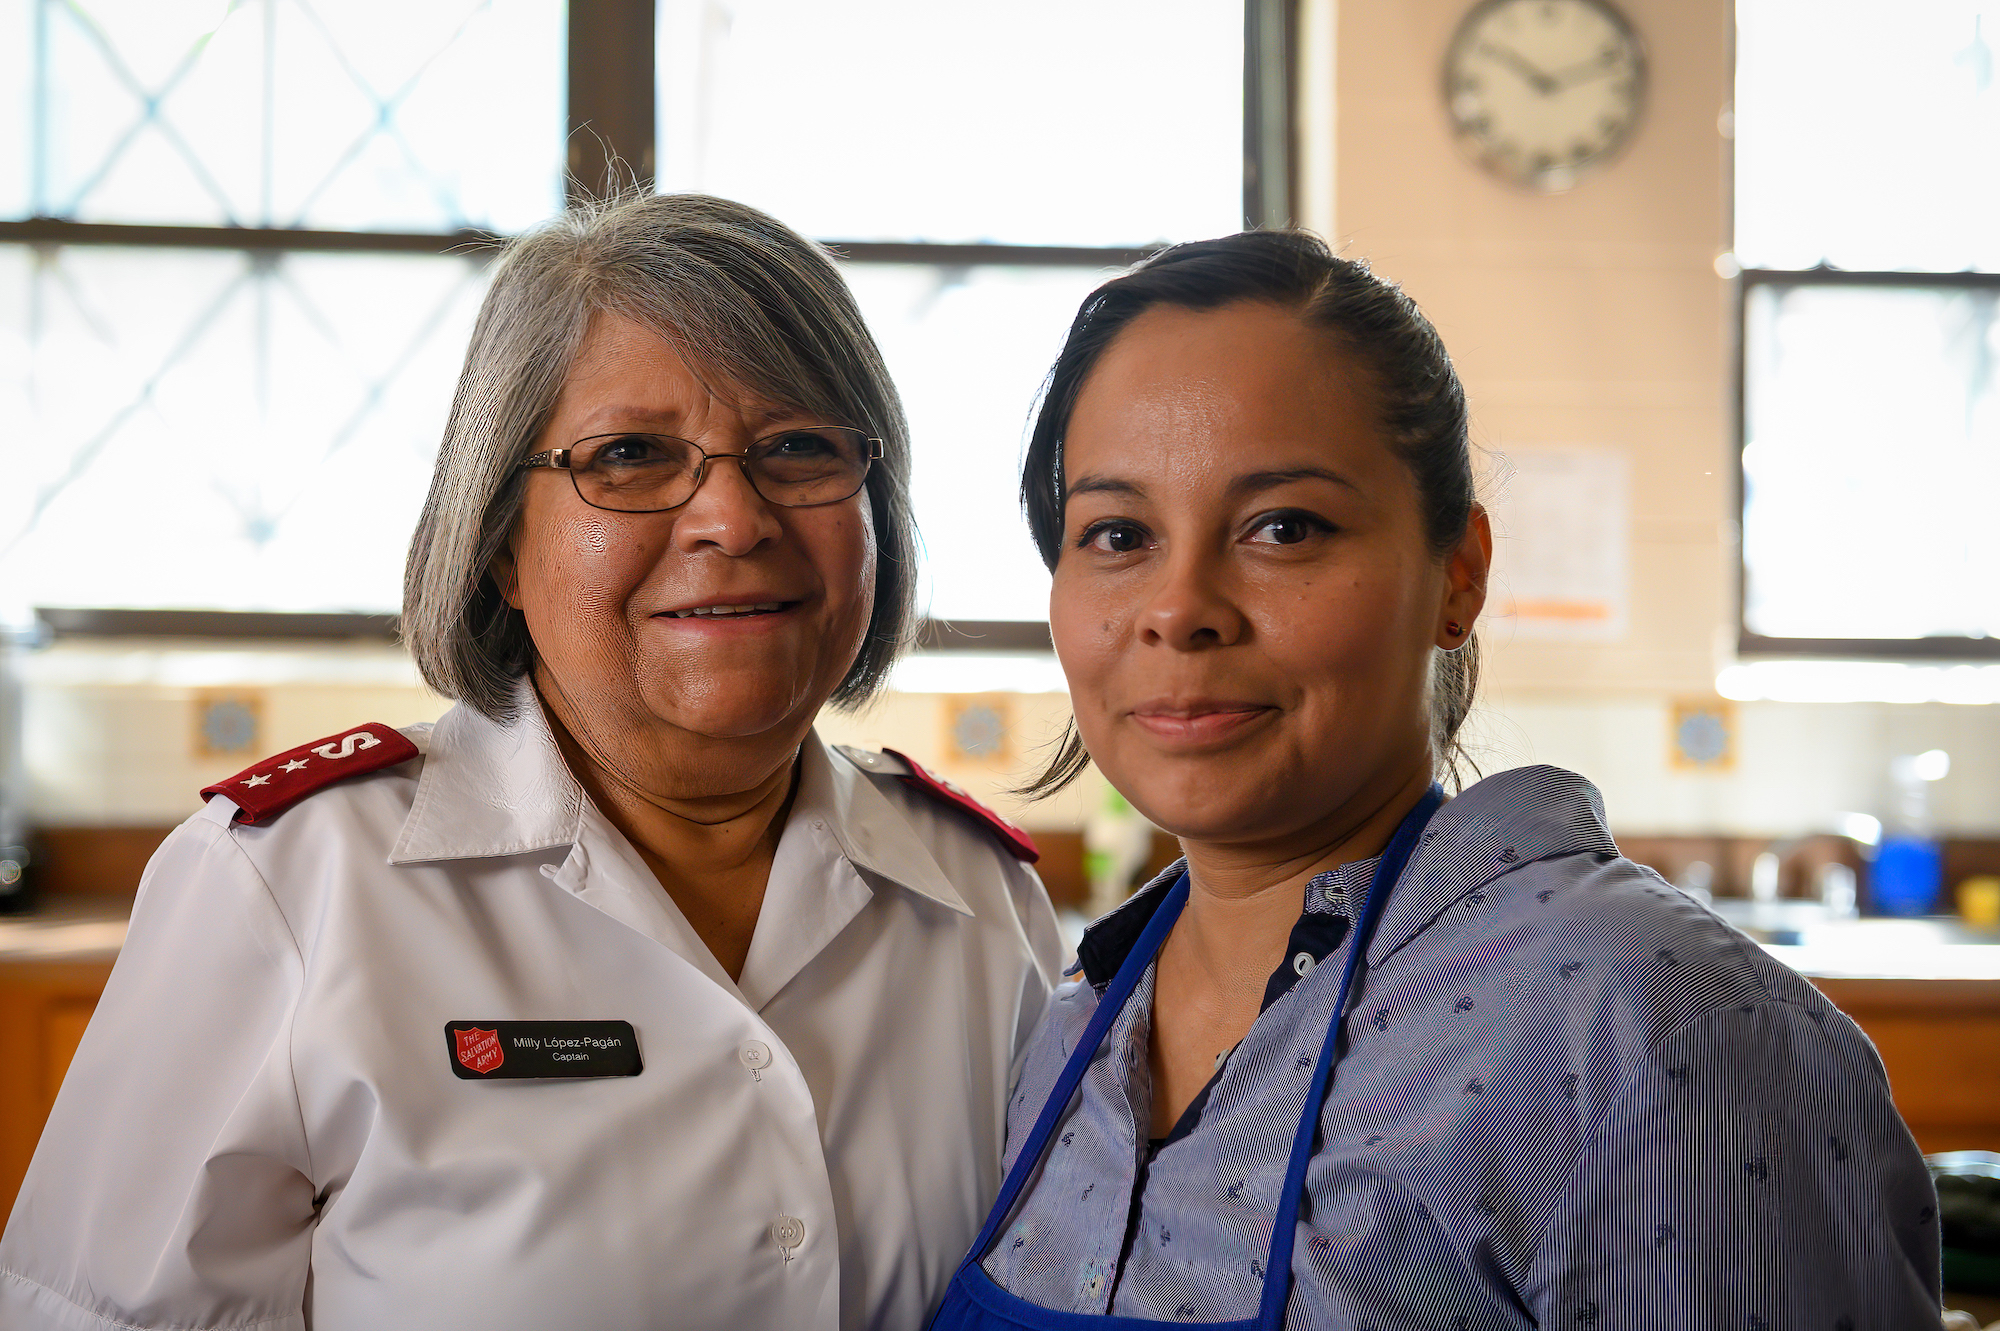 female salvation army officer and female volunteer smile for a photo